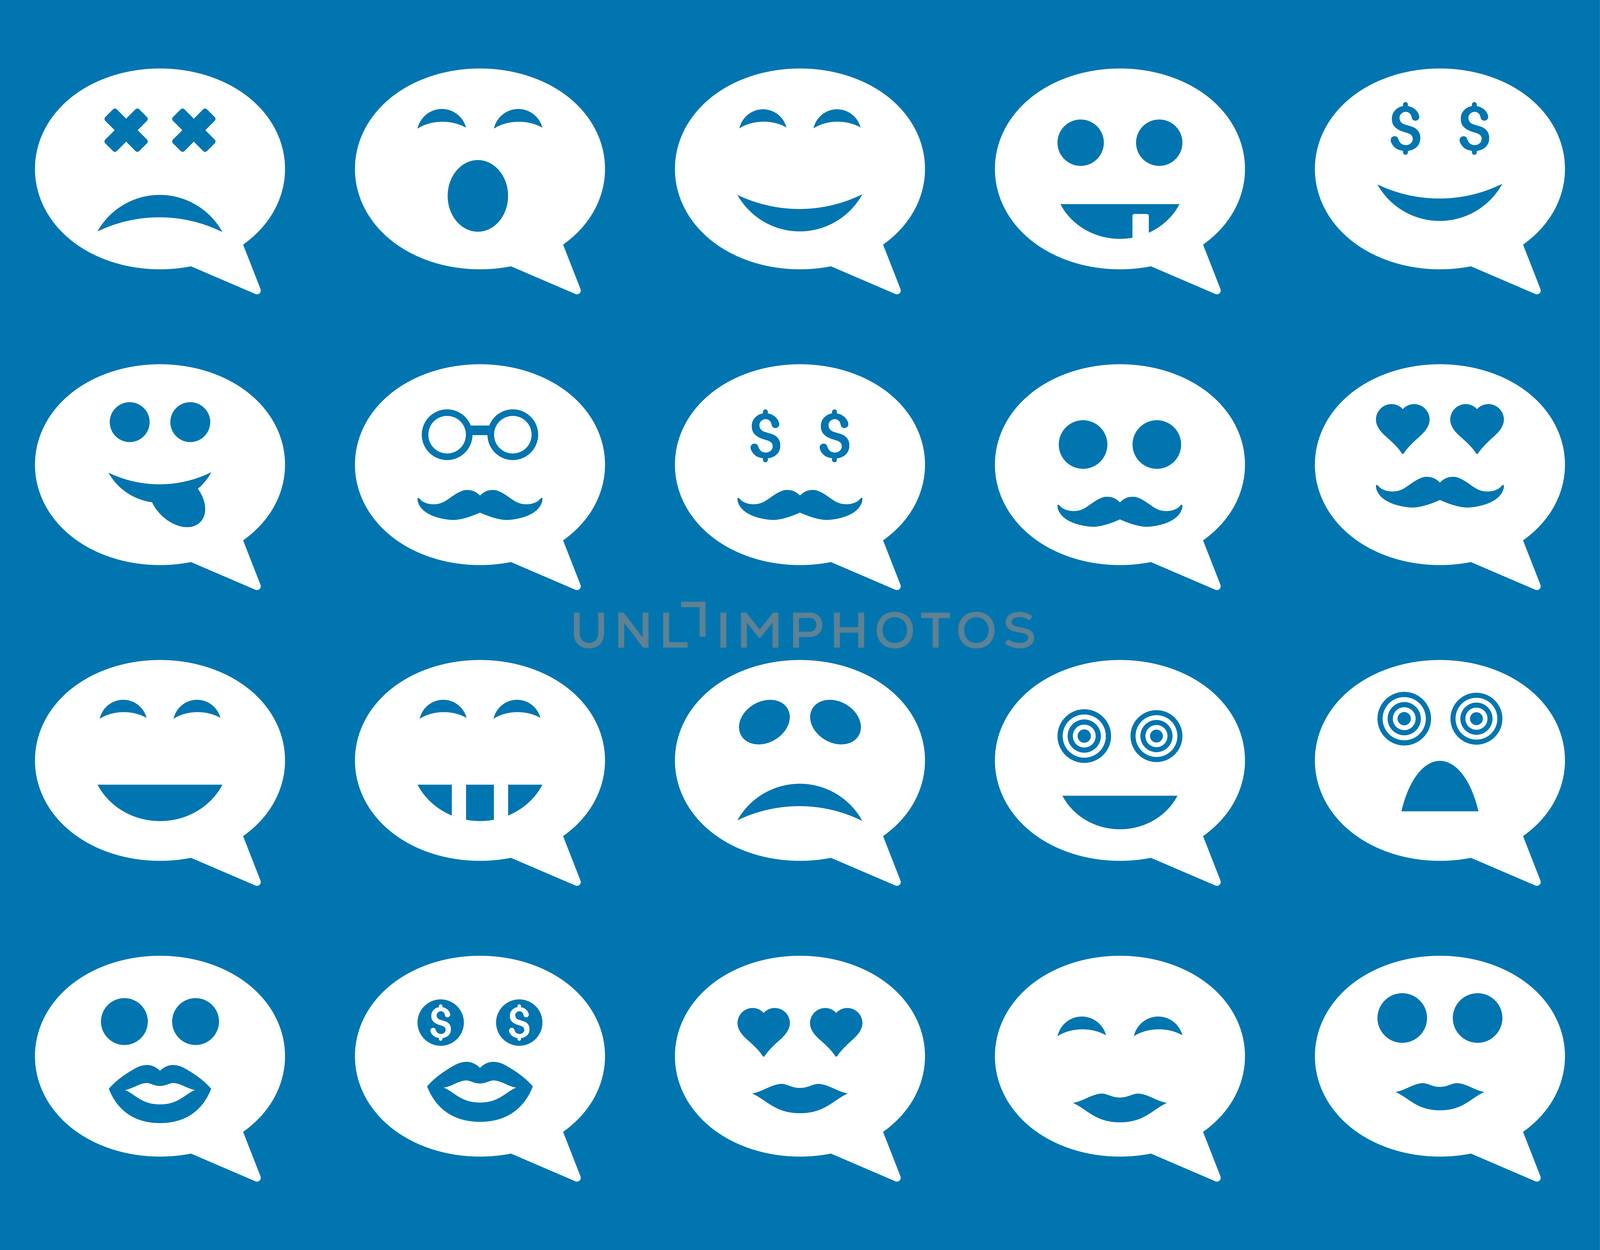 Chat emotion smile icons. Glyph set style is flat images, white symbols, isolated on a blue background.